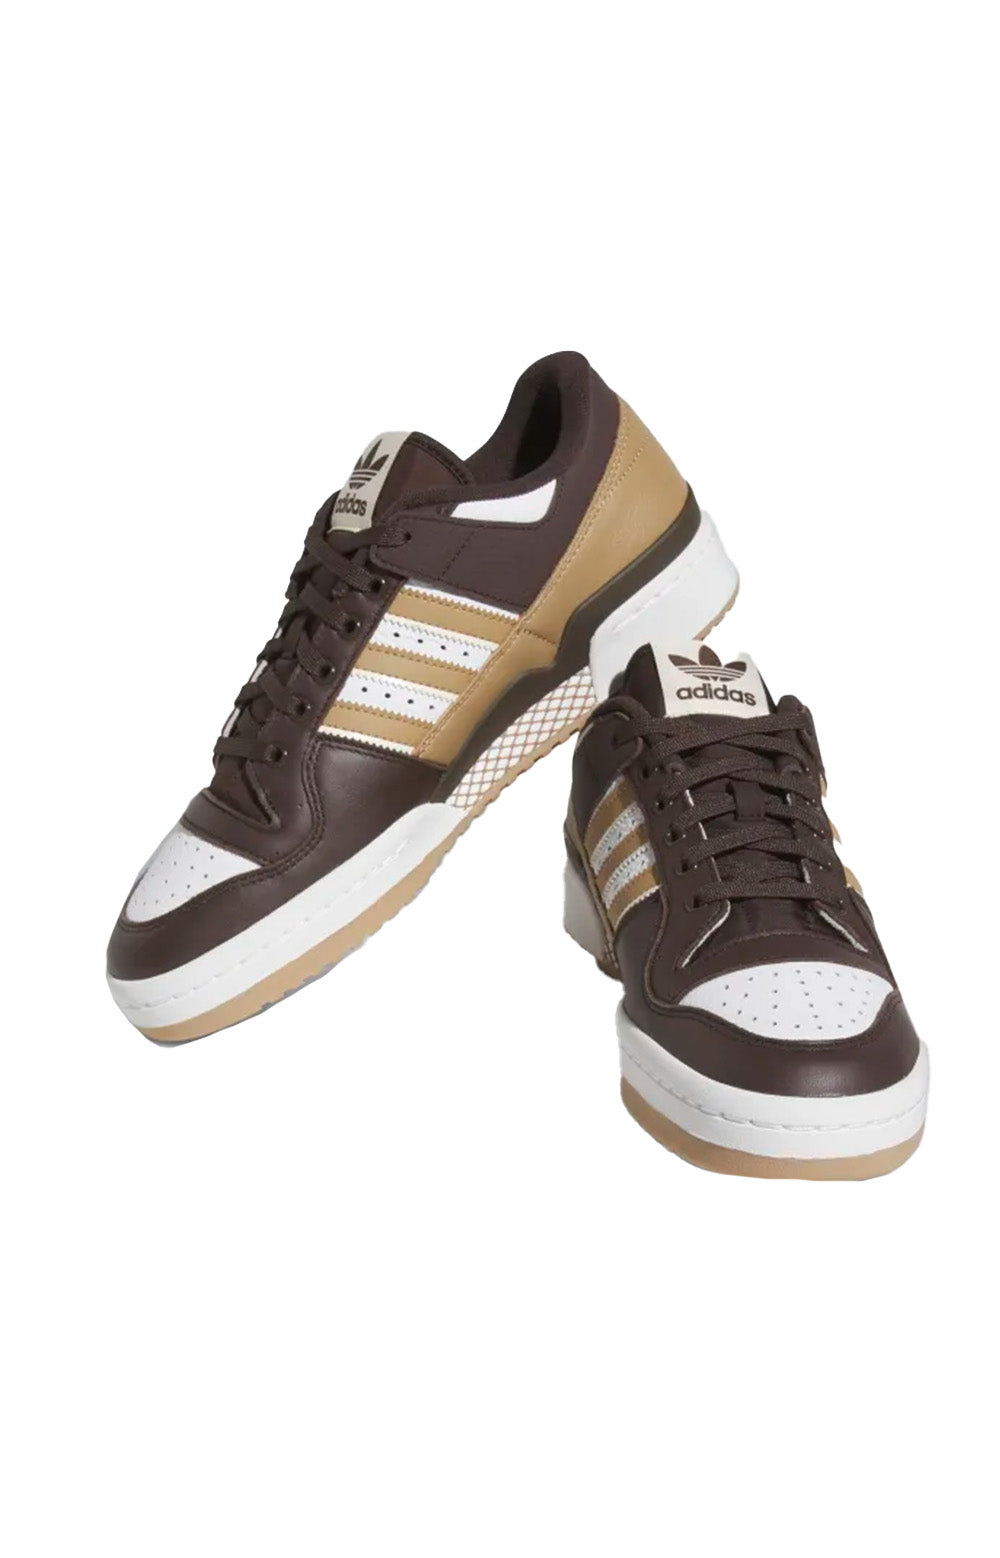 (HP9087) Forum 84 Low ADV Shoes - Brown